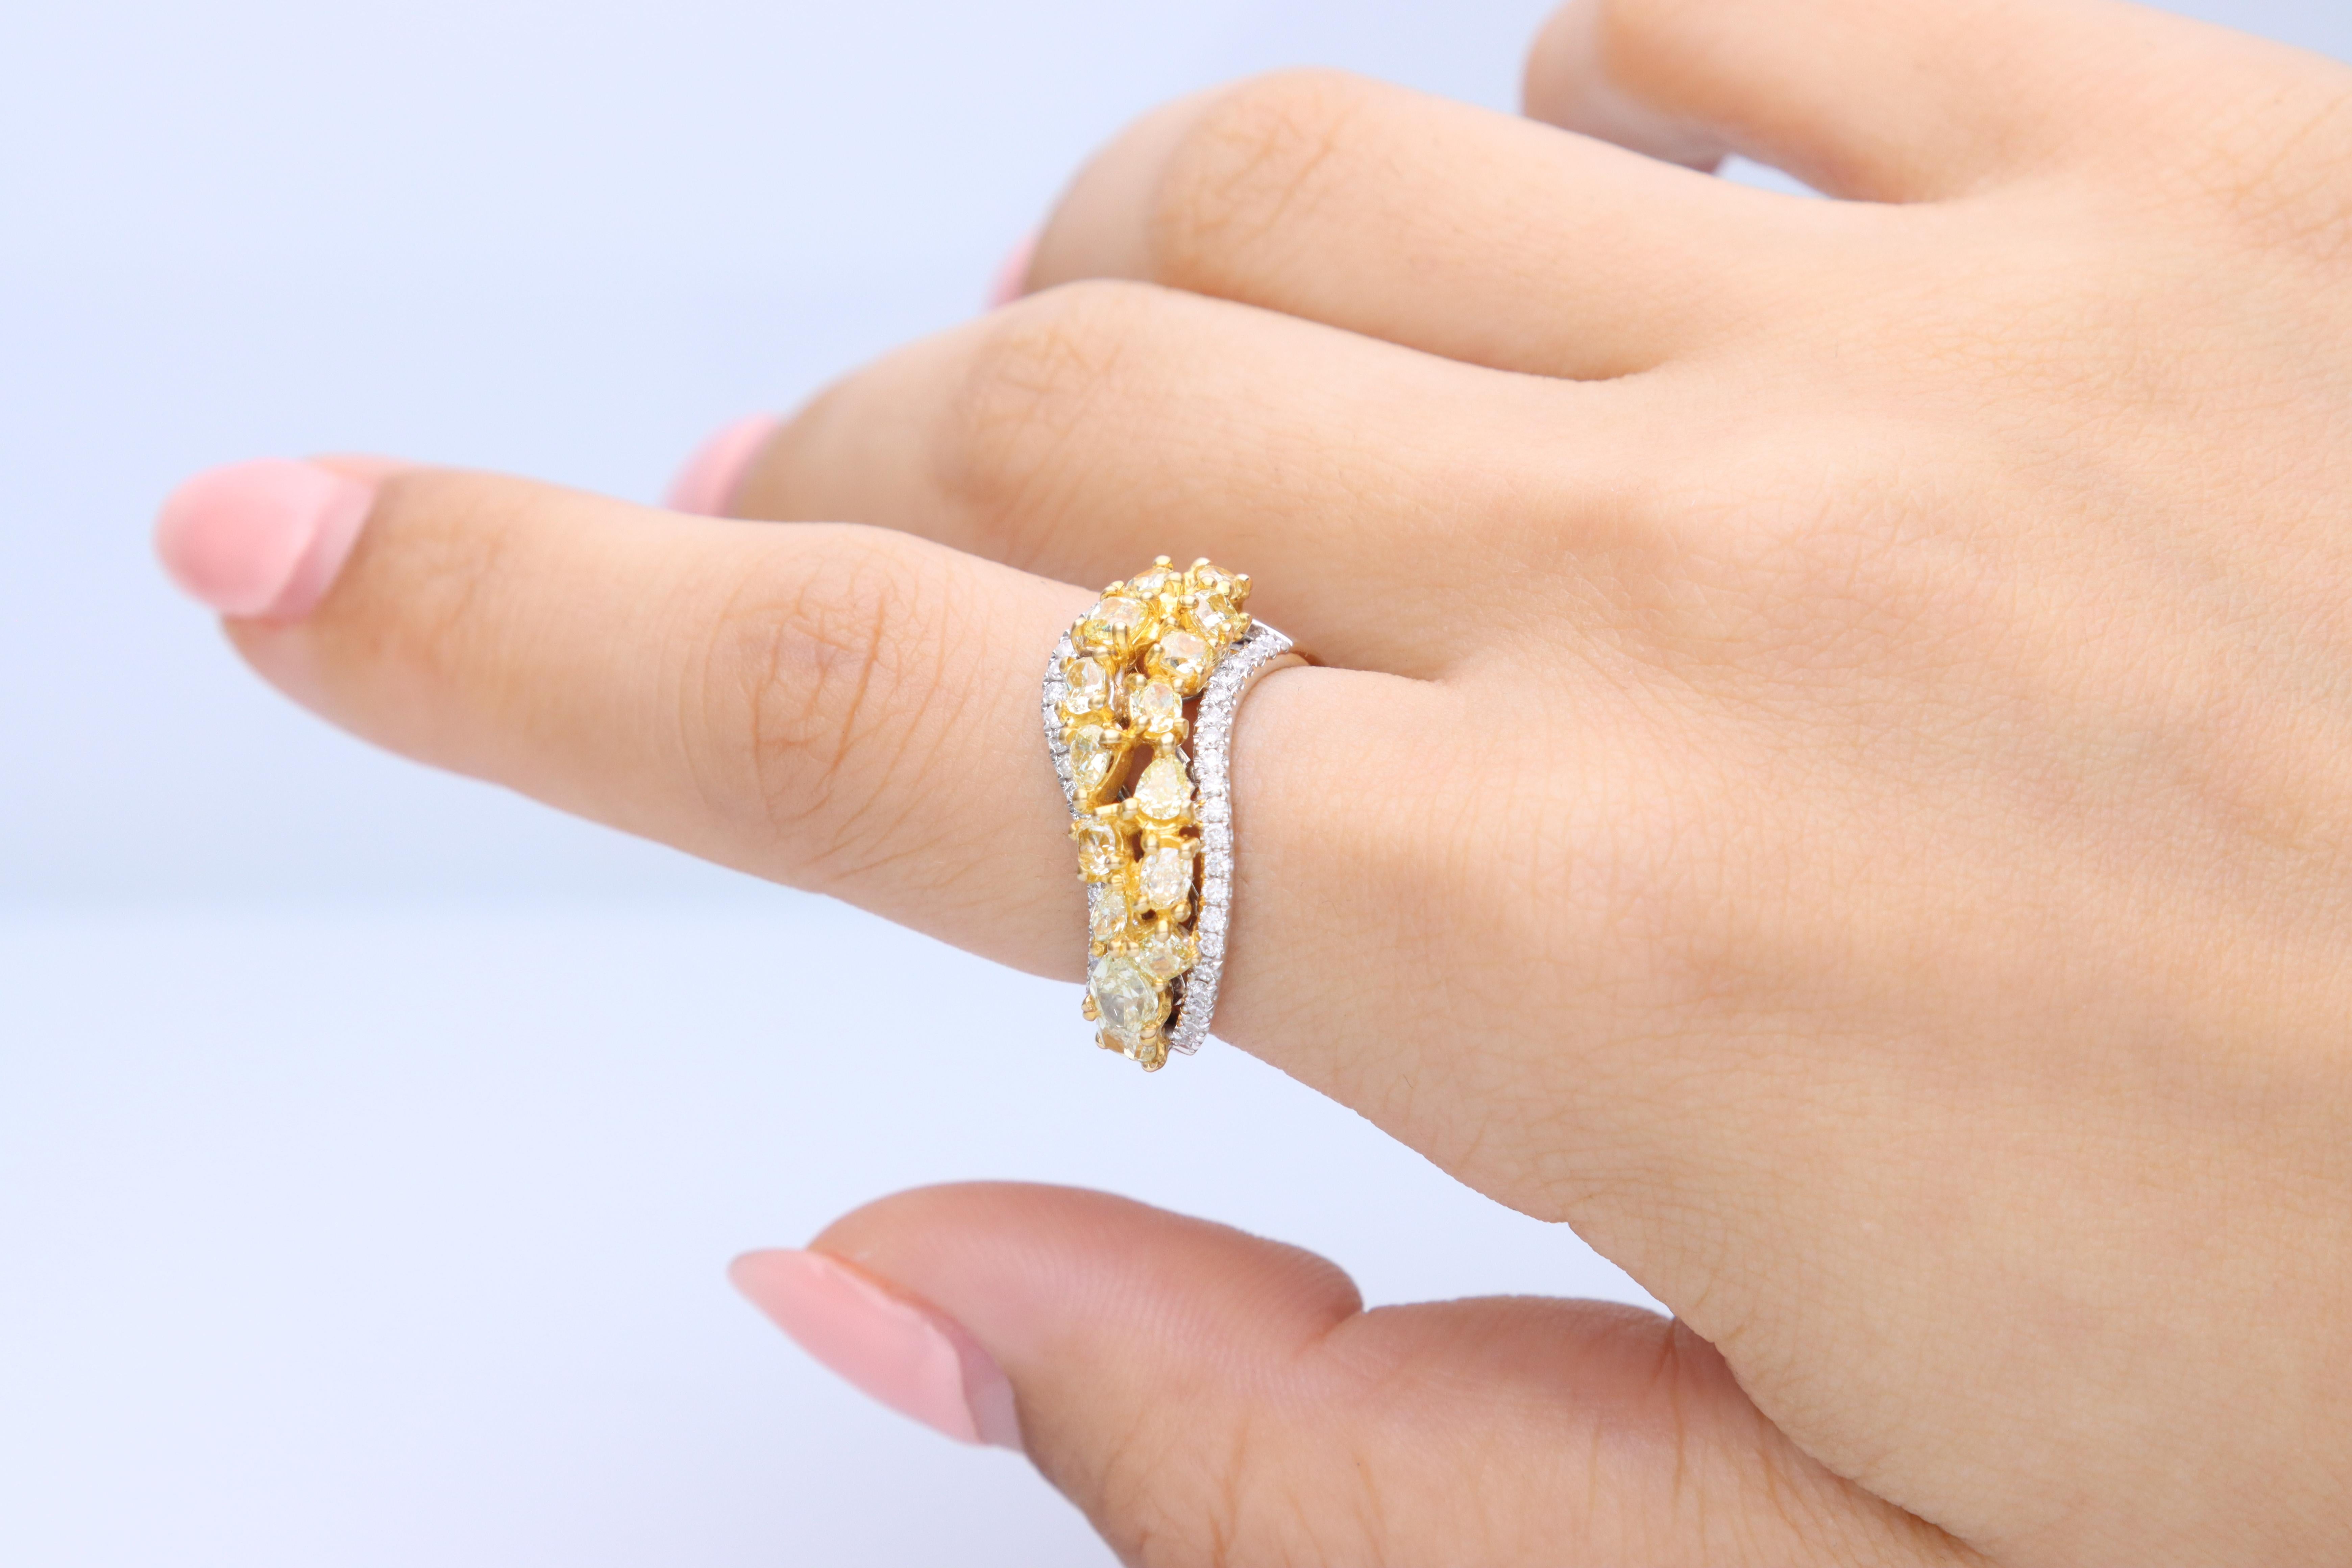 Stunning, timeless, and classy eternity Unique Ring. Decorate yourself in luxury with this Gin & Grace Ring. The 18K Two Tone Gold jewelry boasts 15 pcs 2.46 carat Yellow Diamond and Natural Round-cut white Diamond (45 Pcs) 0.35 Carat accent stones